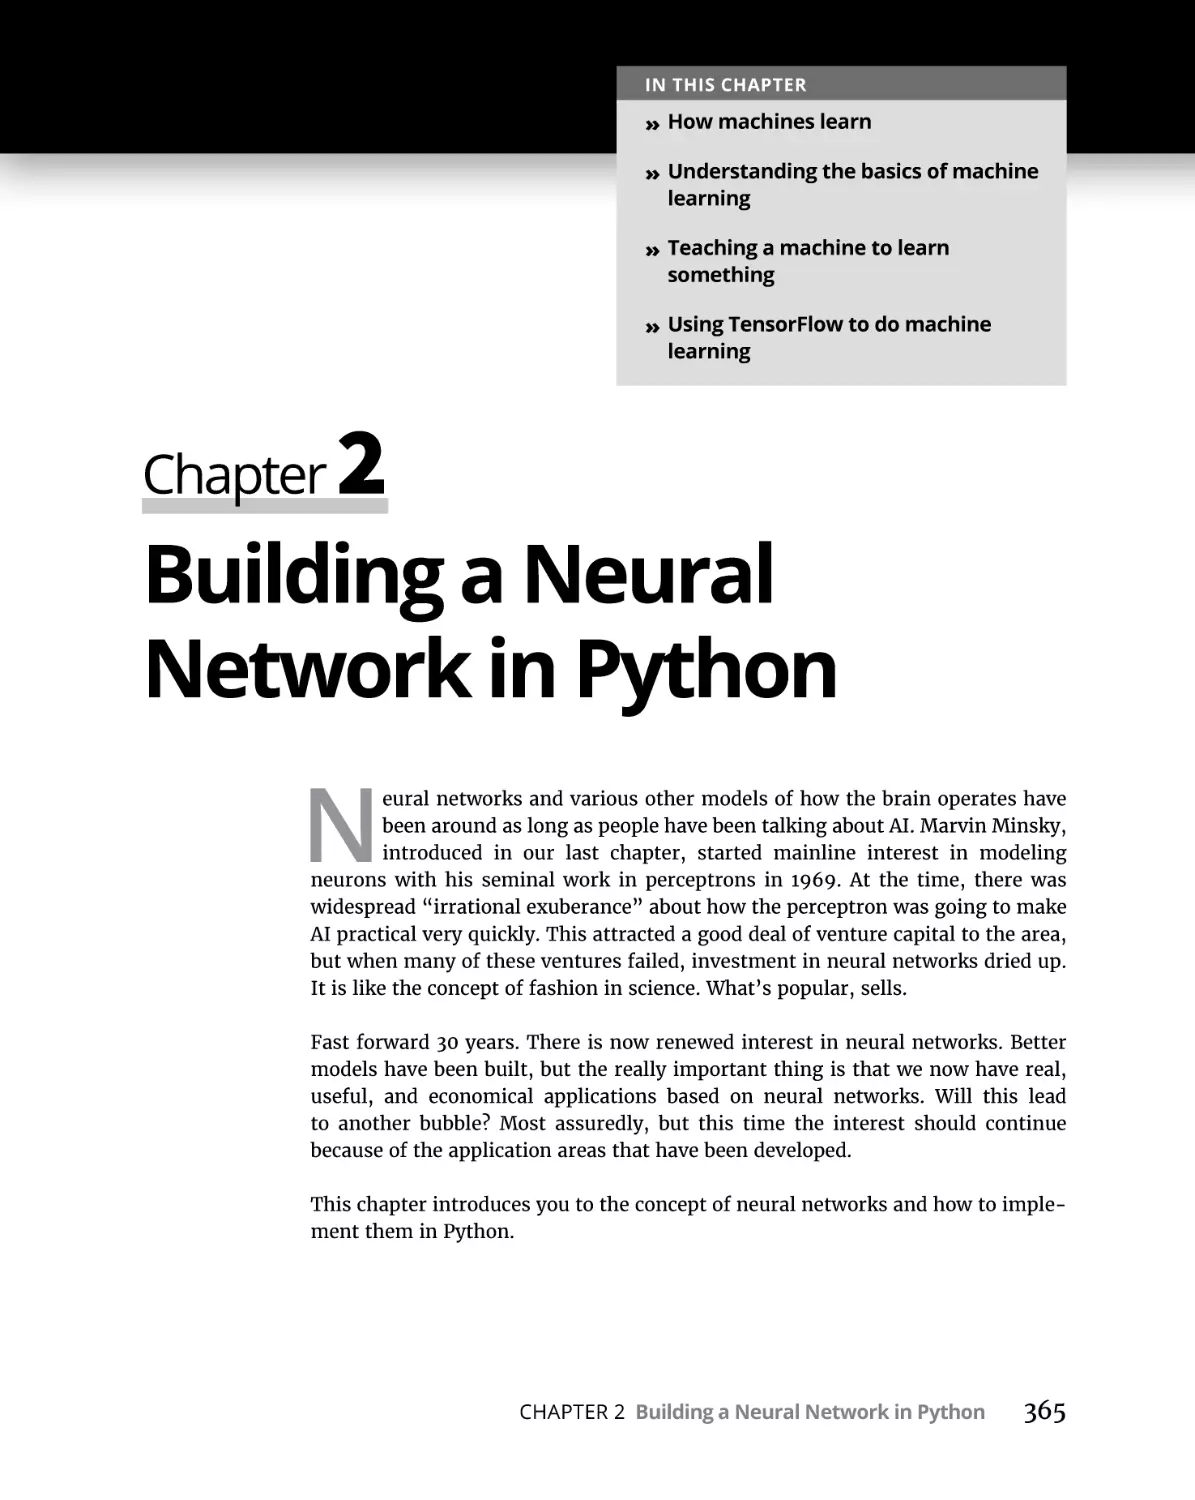 Chapter 2 Building a Neural Network in Python